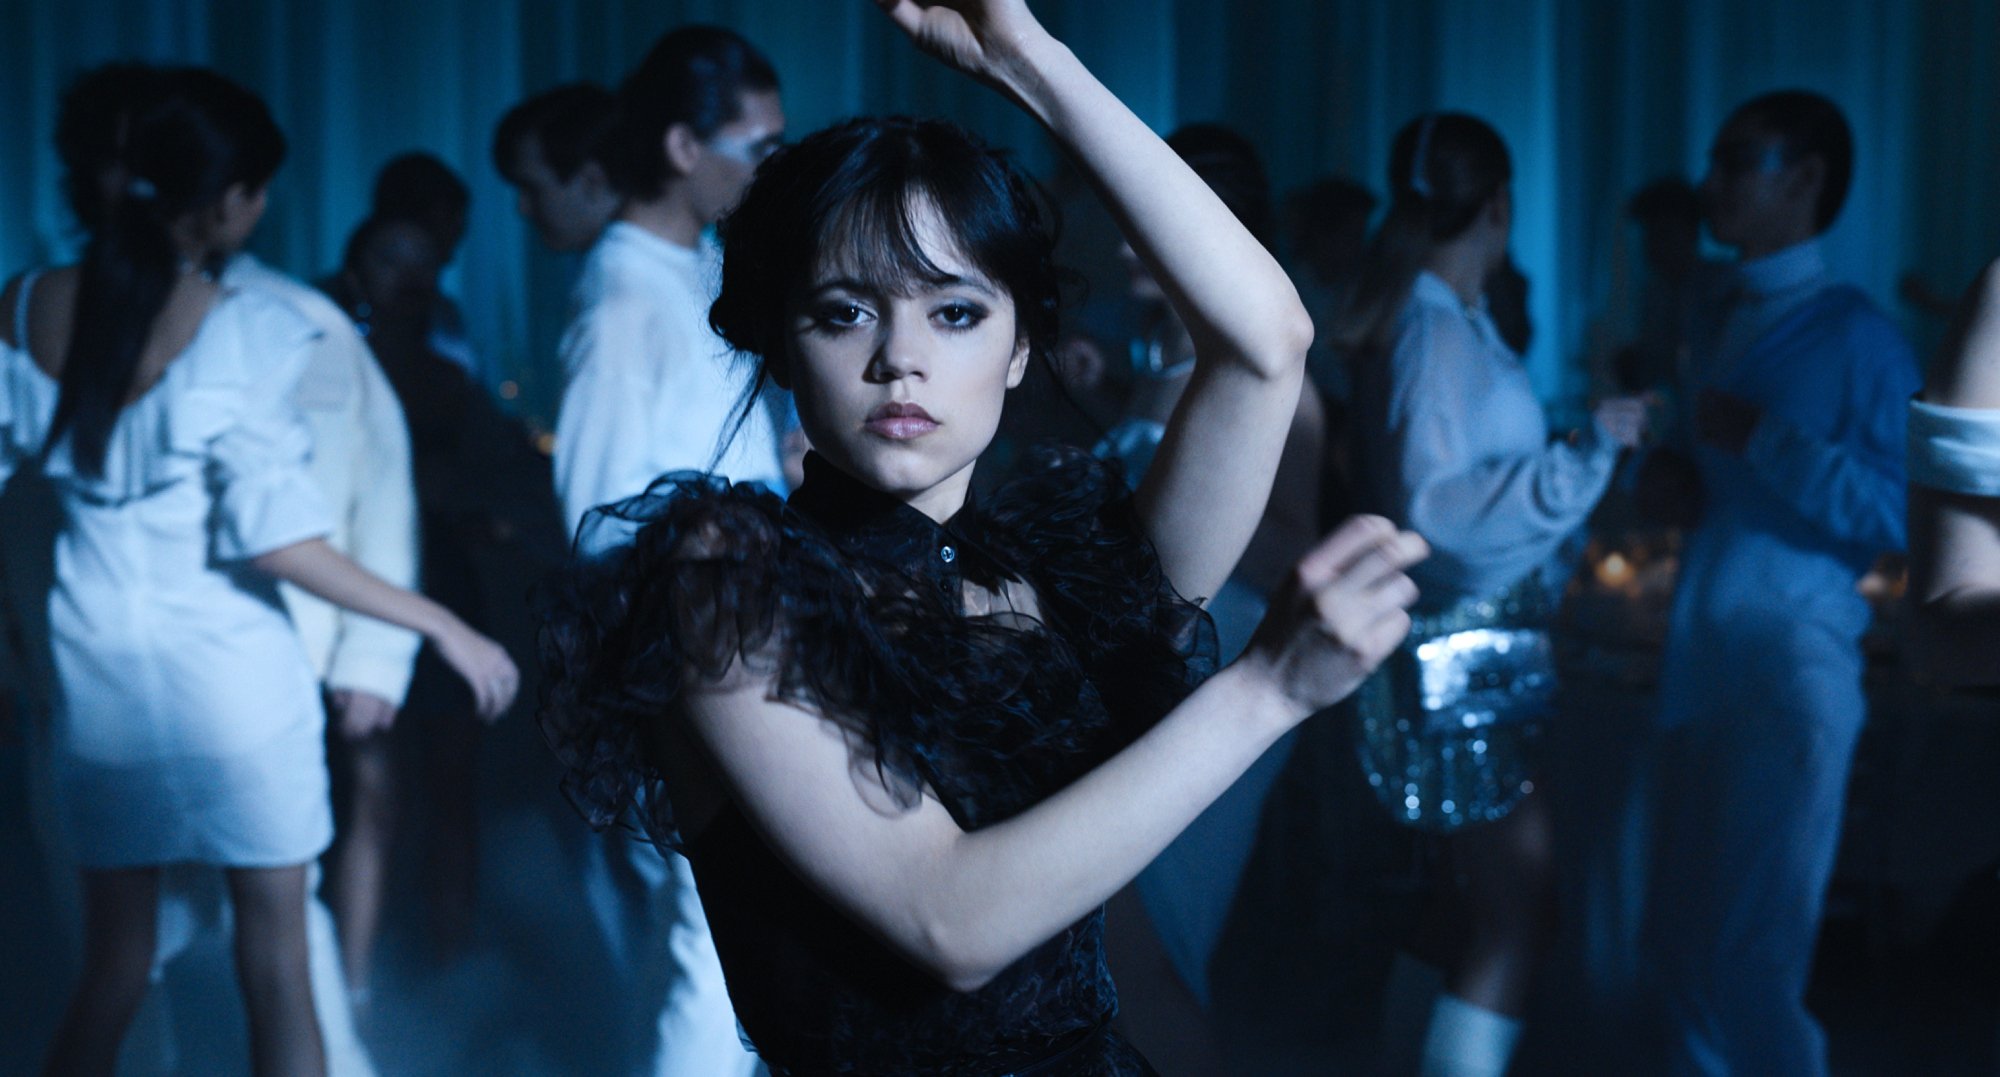 Jenna Ortega as Wednesday performing the dance scene at the Rave'N in 'Wednesday.'